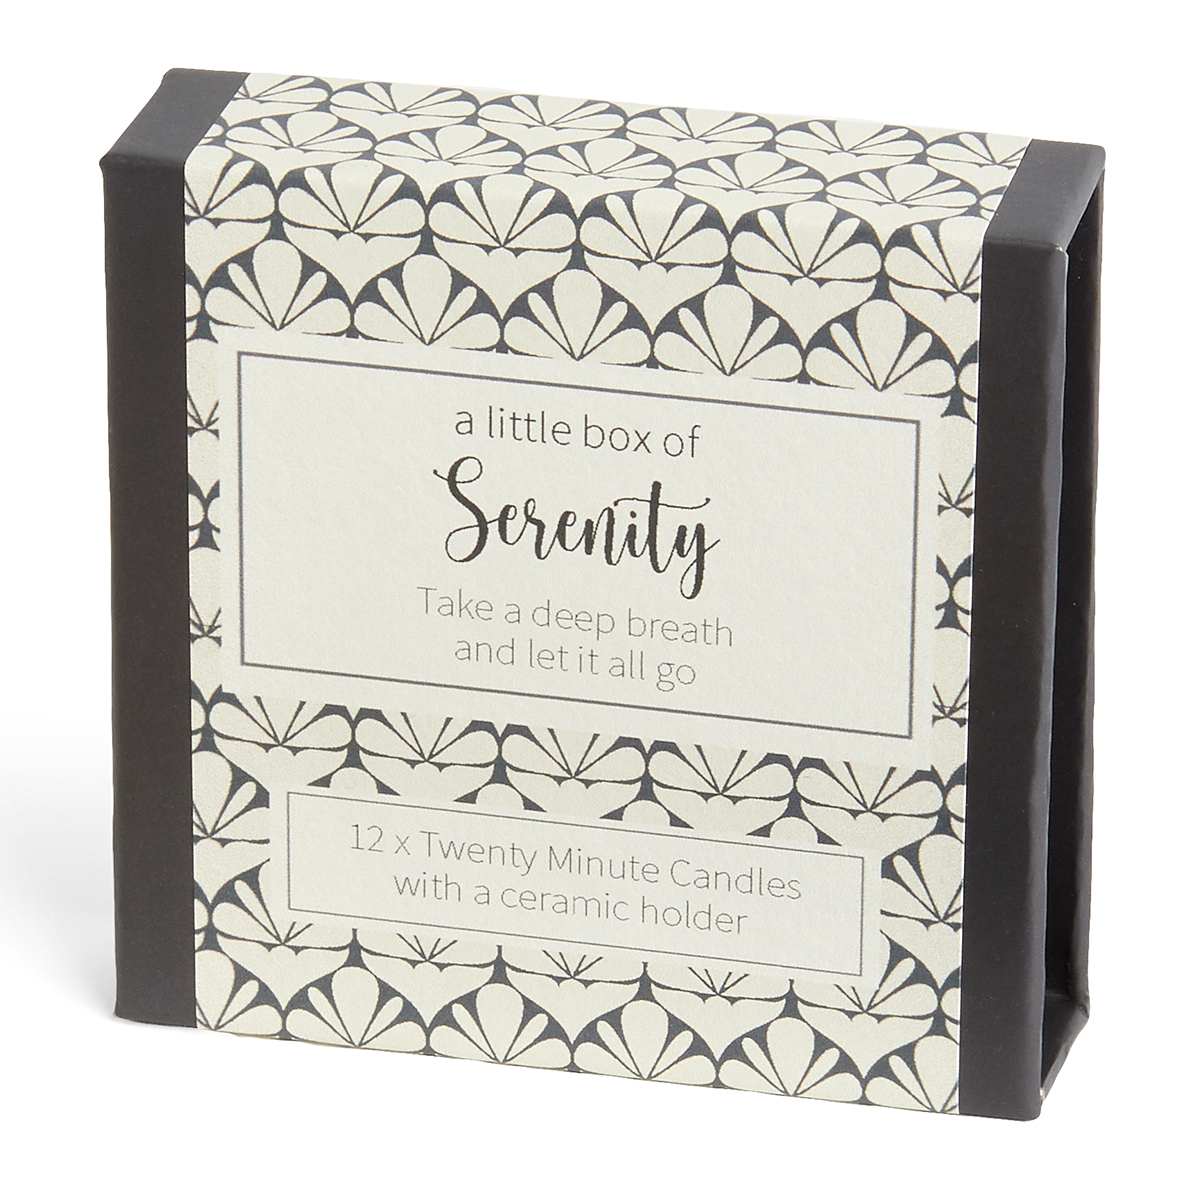 A little box of Serenity Candles